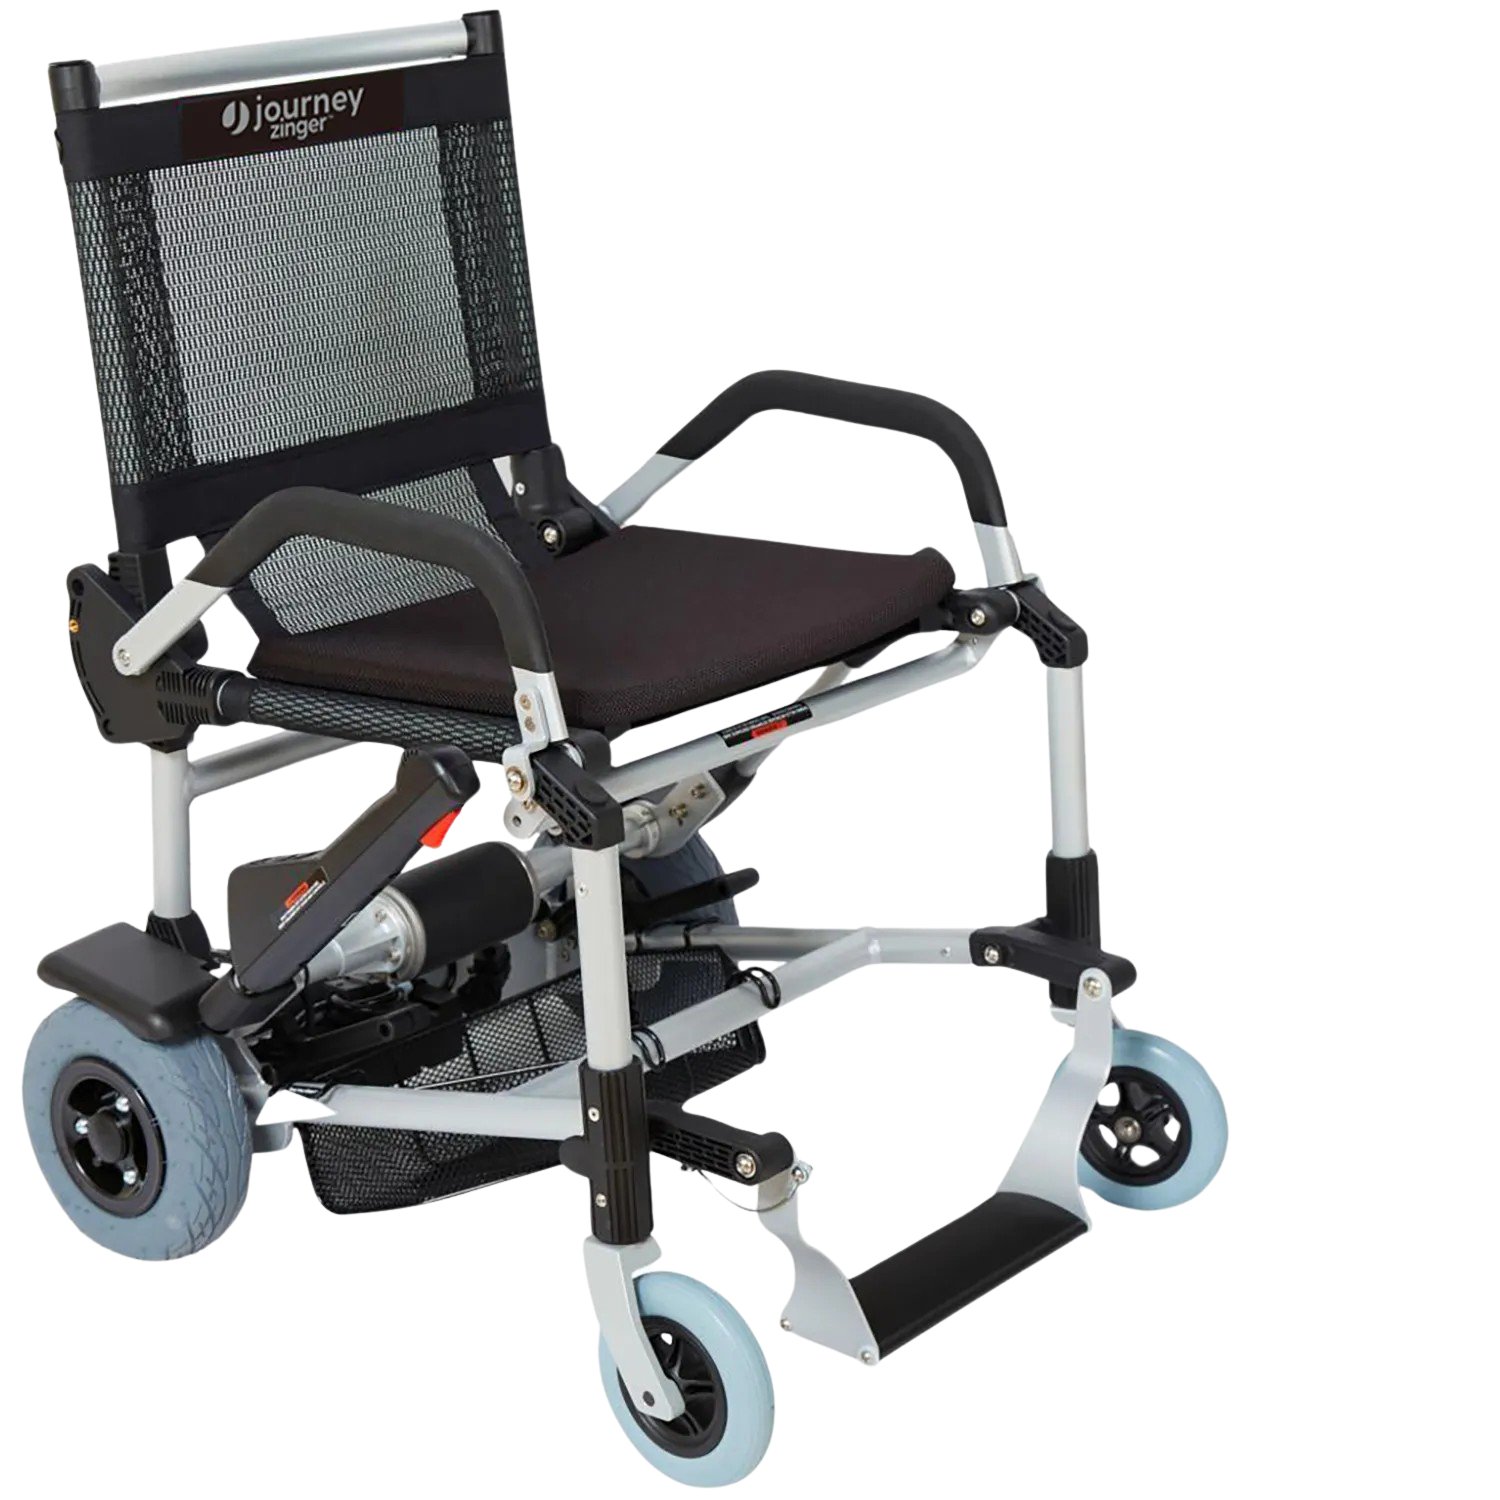 Journey, Journey Zinger Folding Power Chair 36V 7Ah 250W 6 MPH 8 Mile Range Two-Handed Control 08300 New